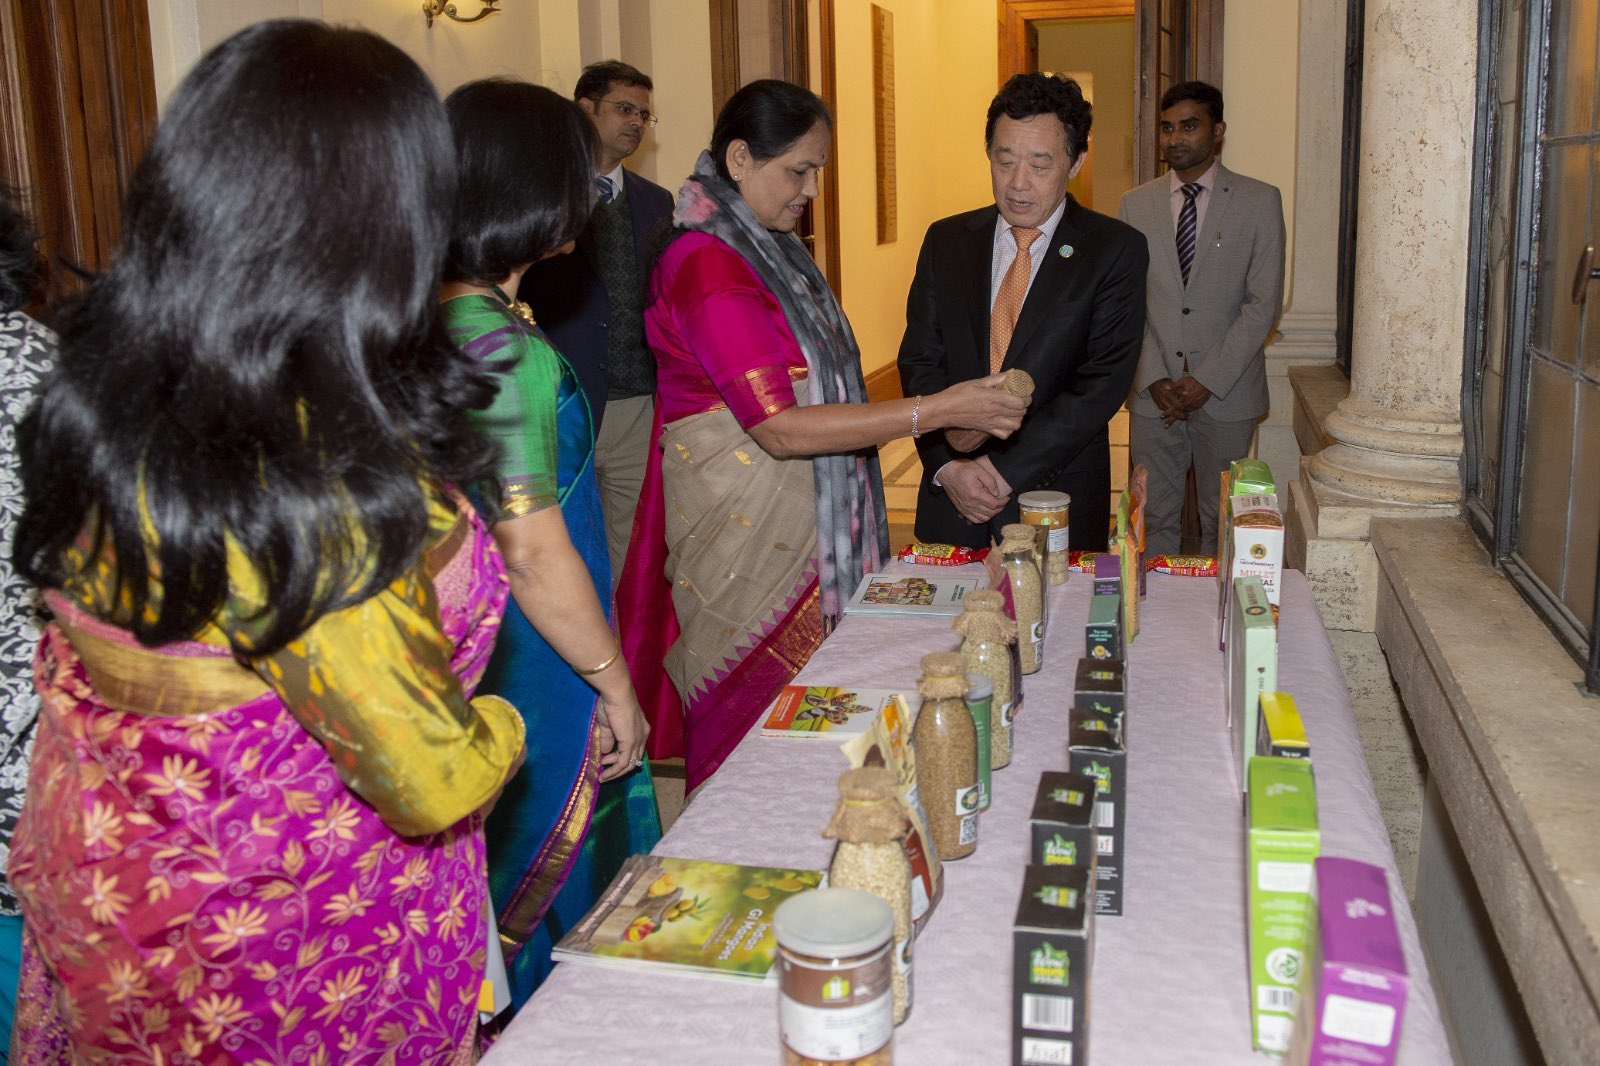 Reception hosted in honour of MoS Agriculture Hon'ble Shobha Karandlaje at the Embassy of India